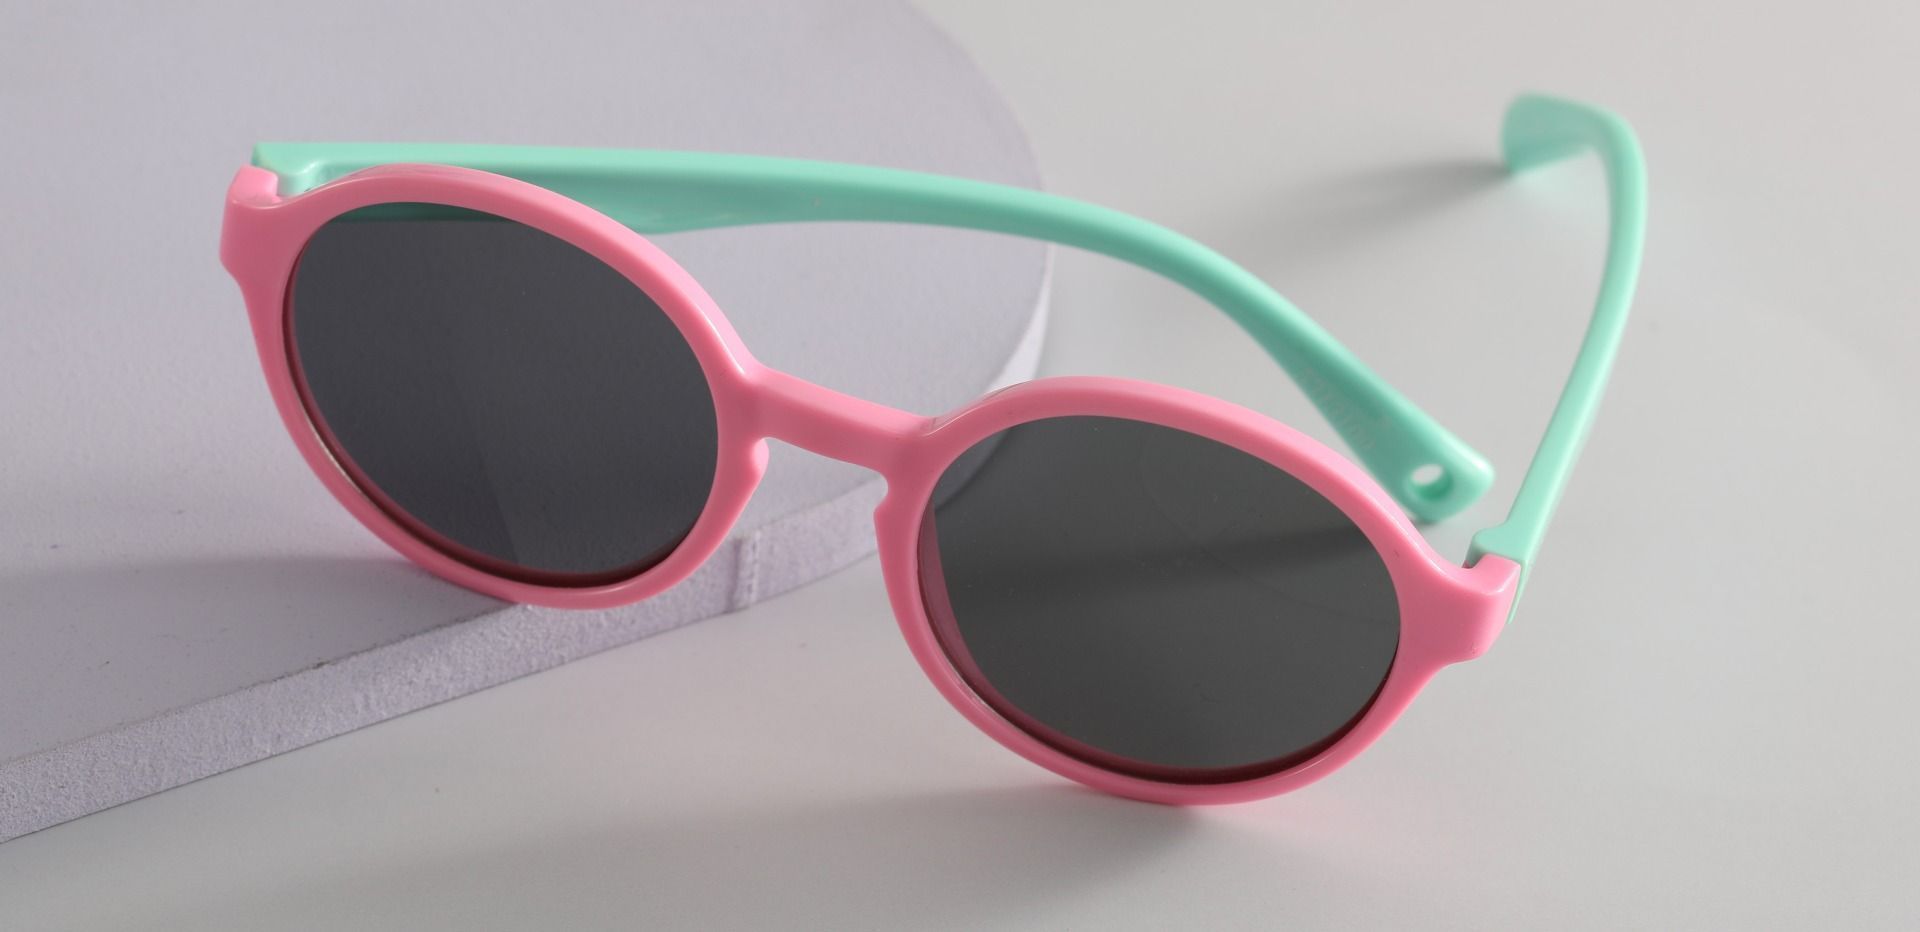 Cotton Candy Round Non-Rx Sunglasses - Pink Frame With Gray Lenses